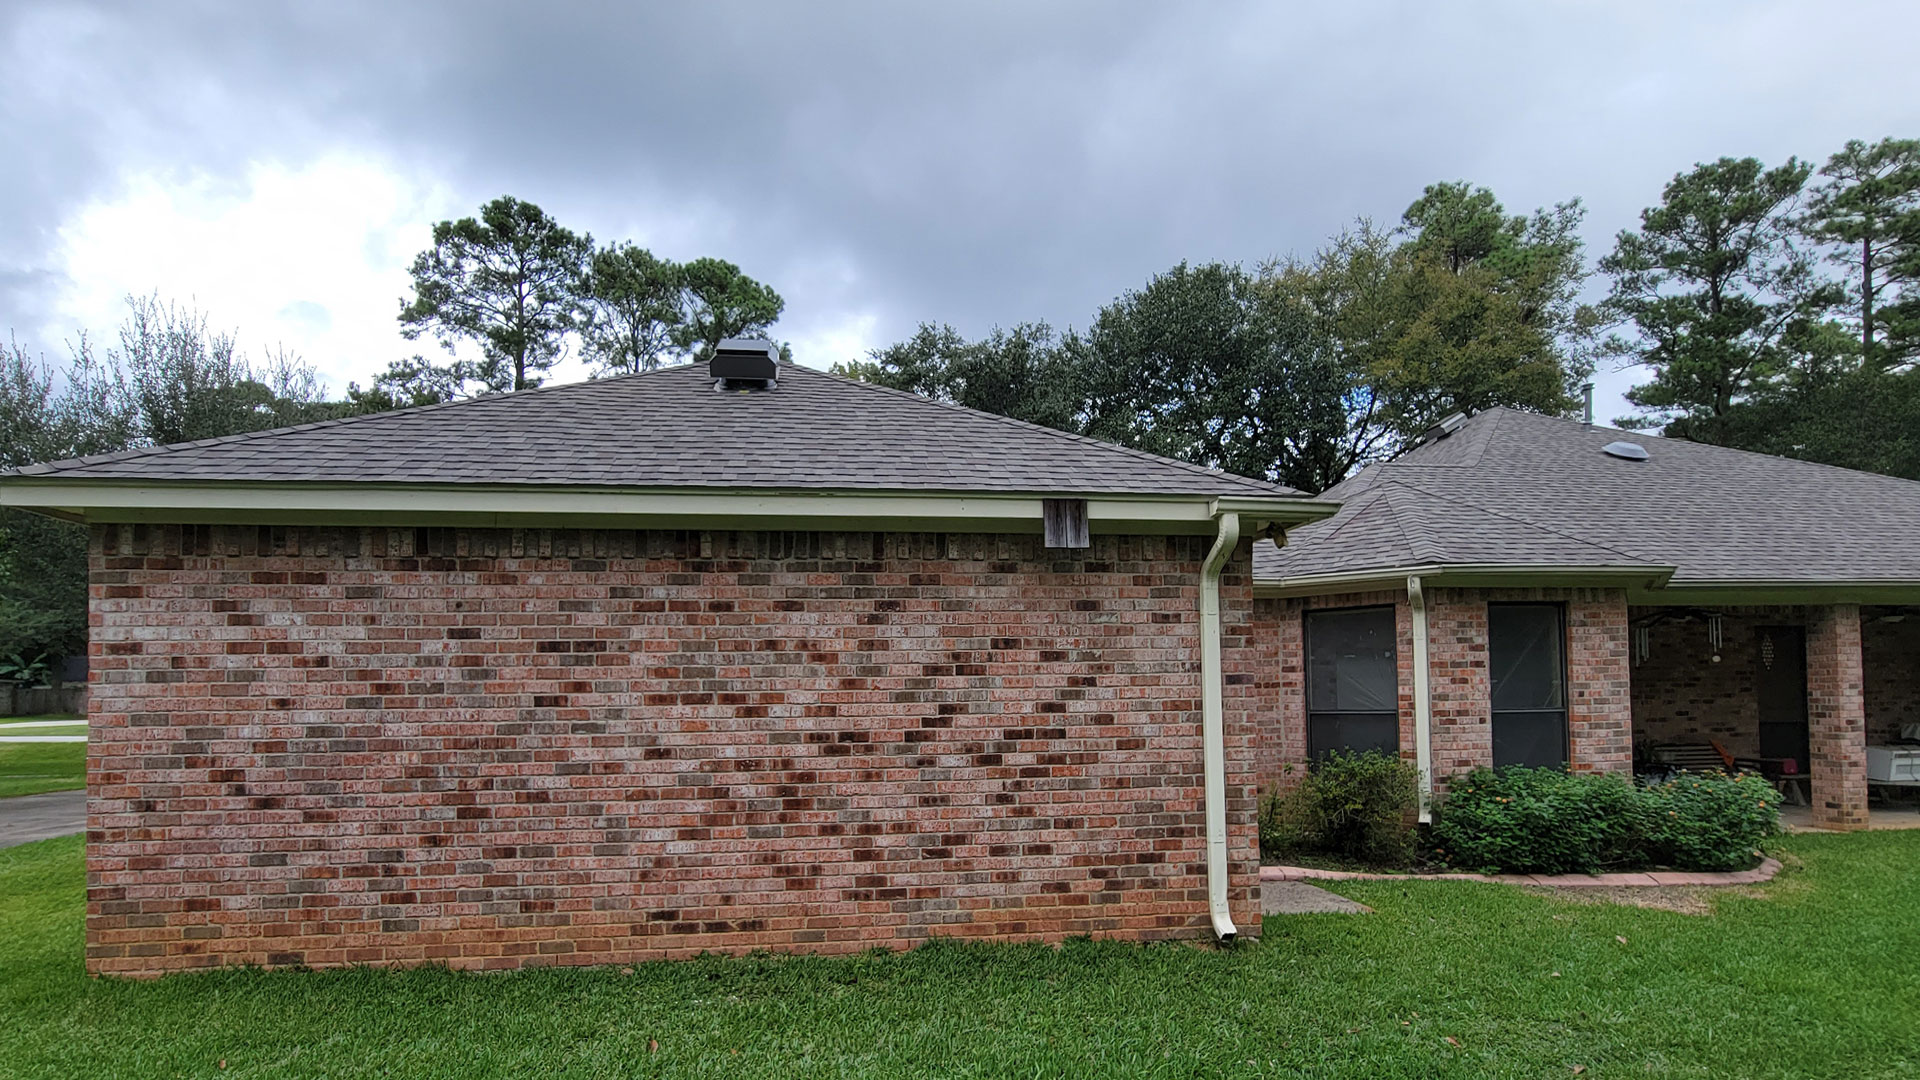 A rear view of the roofing job upon completion. Certainteed's ClimateFlex® - Colored in weathered wood. And Shadow Ridge® plus Solar Power Attic Vents installed in Tomball, Texas (a city between Cypress and Spring in Northern Houston).